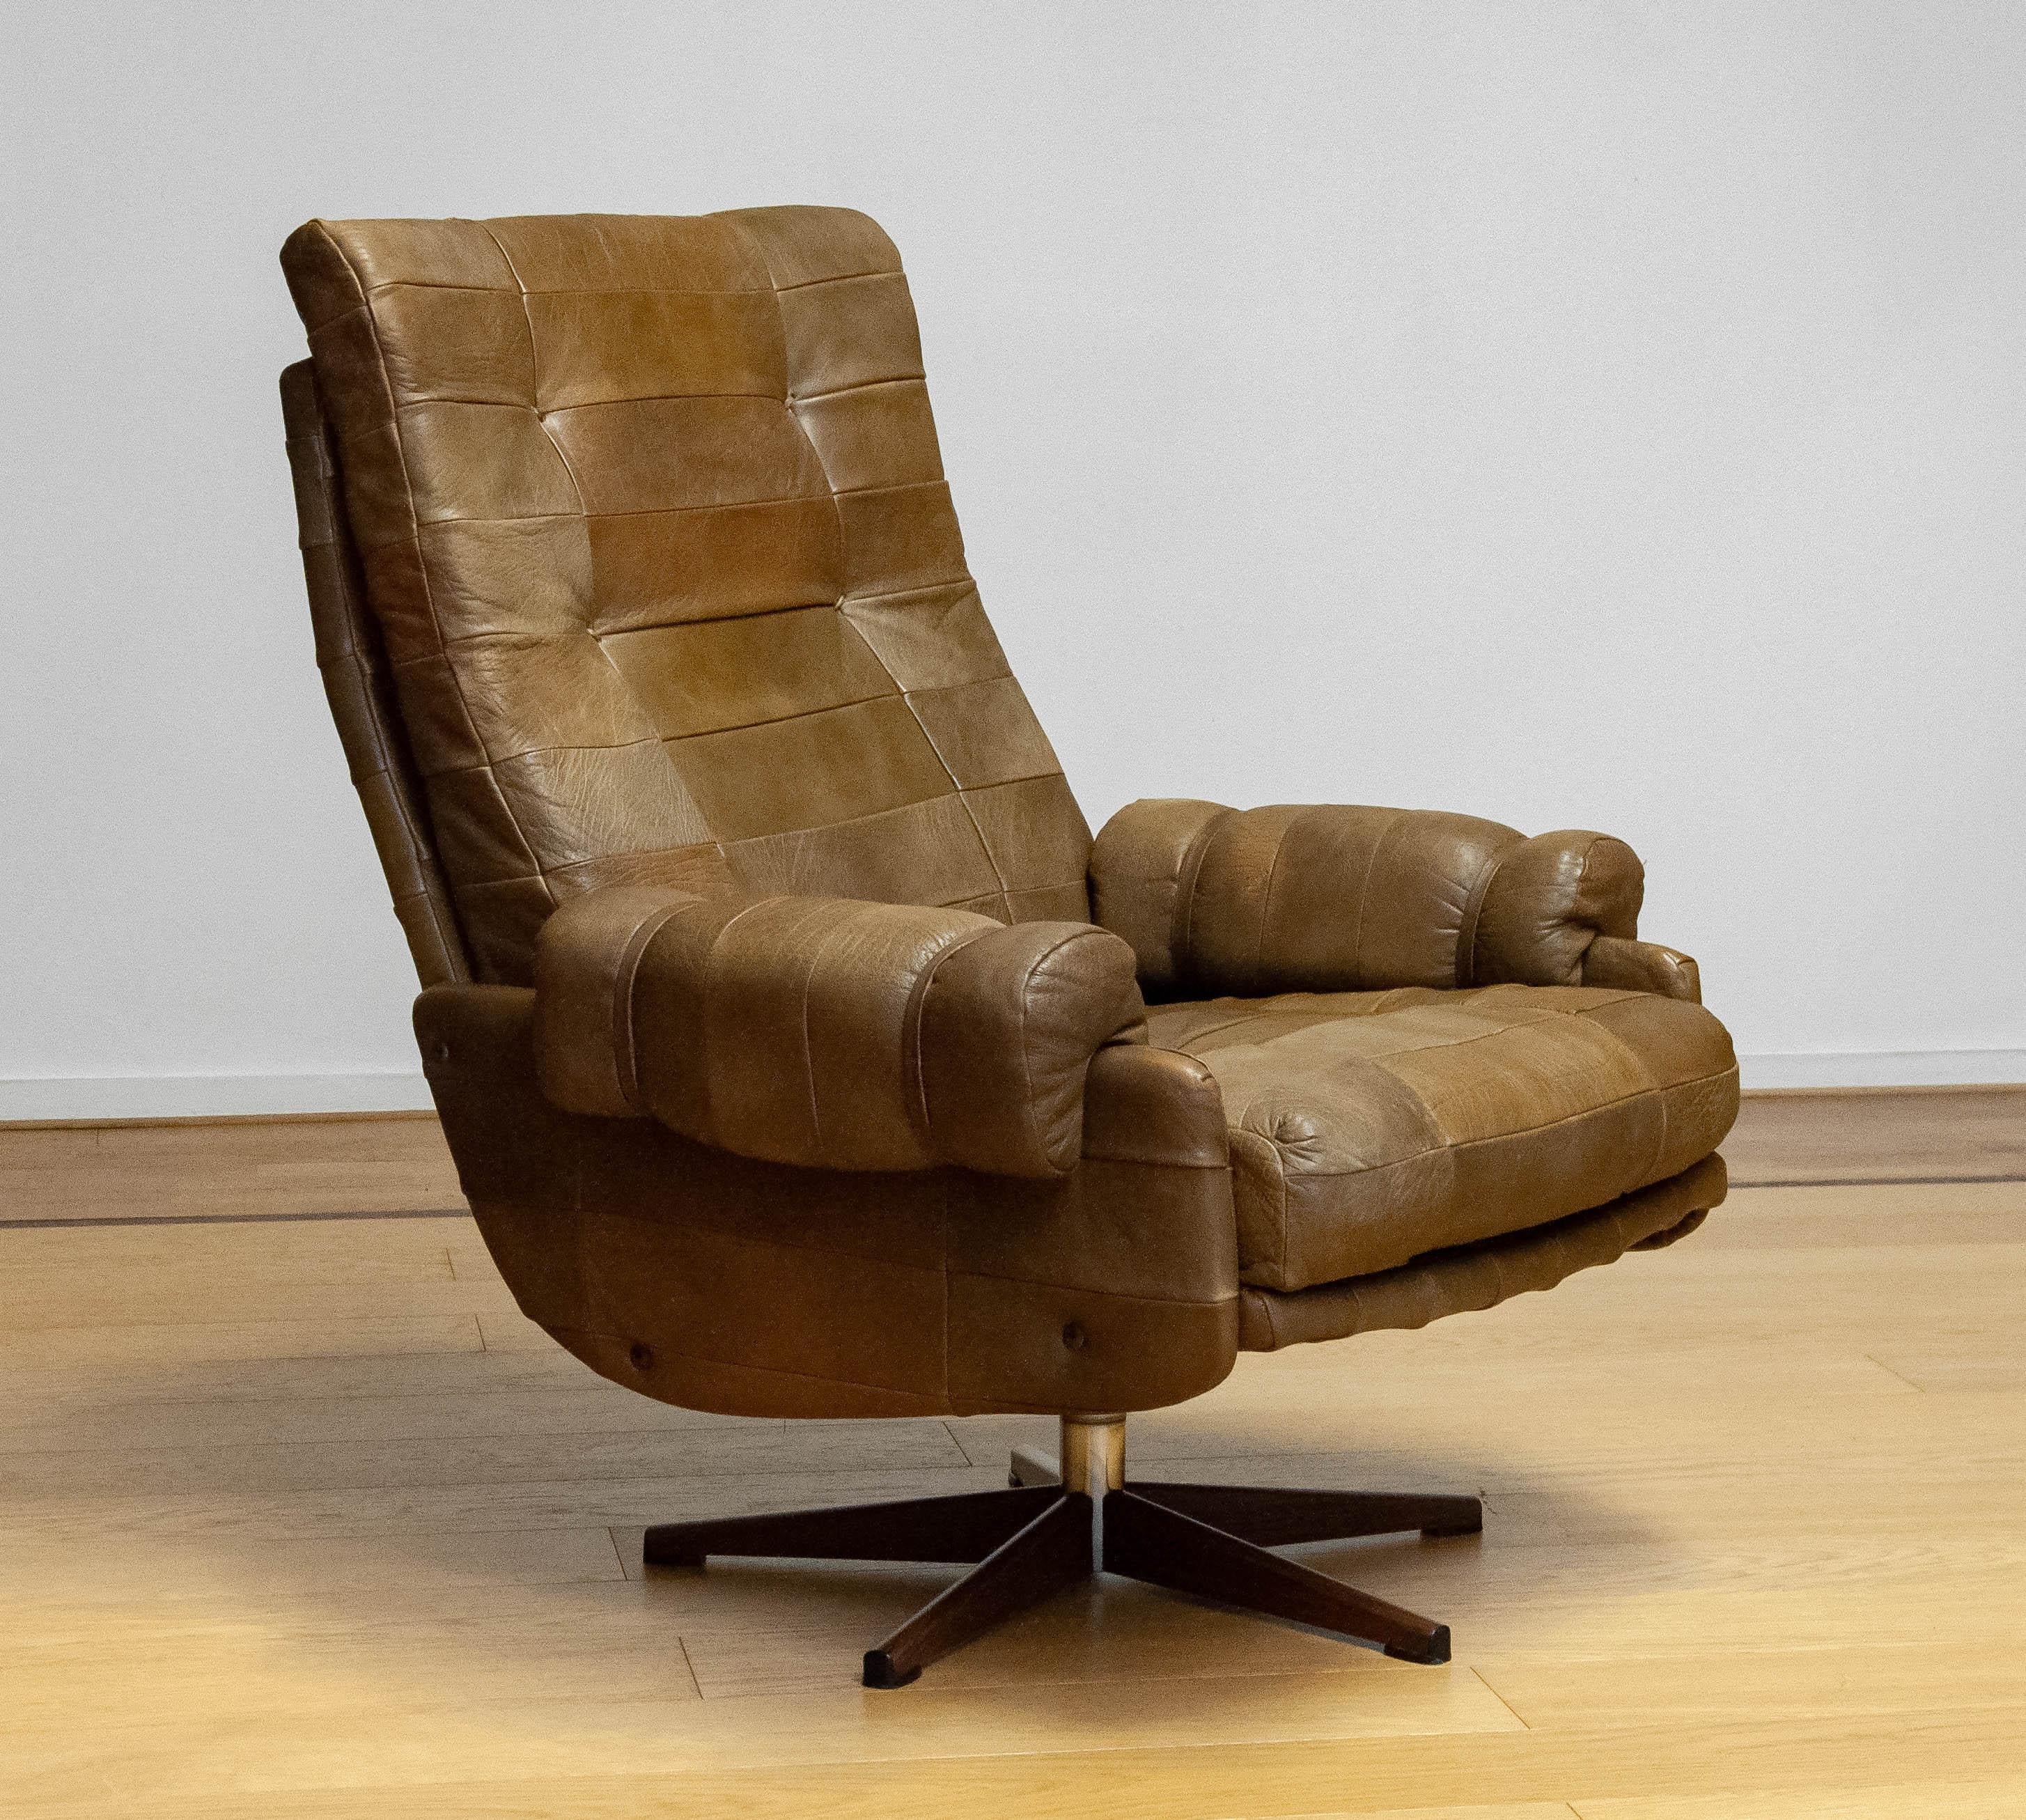 Extremely comfortable swivel chair by Arne Norell For Norell Möbler AB in Sweden. The chair is upholstered with beautiful and sturdy olive green ( patchwork ) buffalo leather. The chair supports great and is absolutely made for long seat / rest